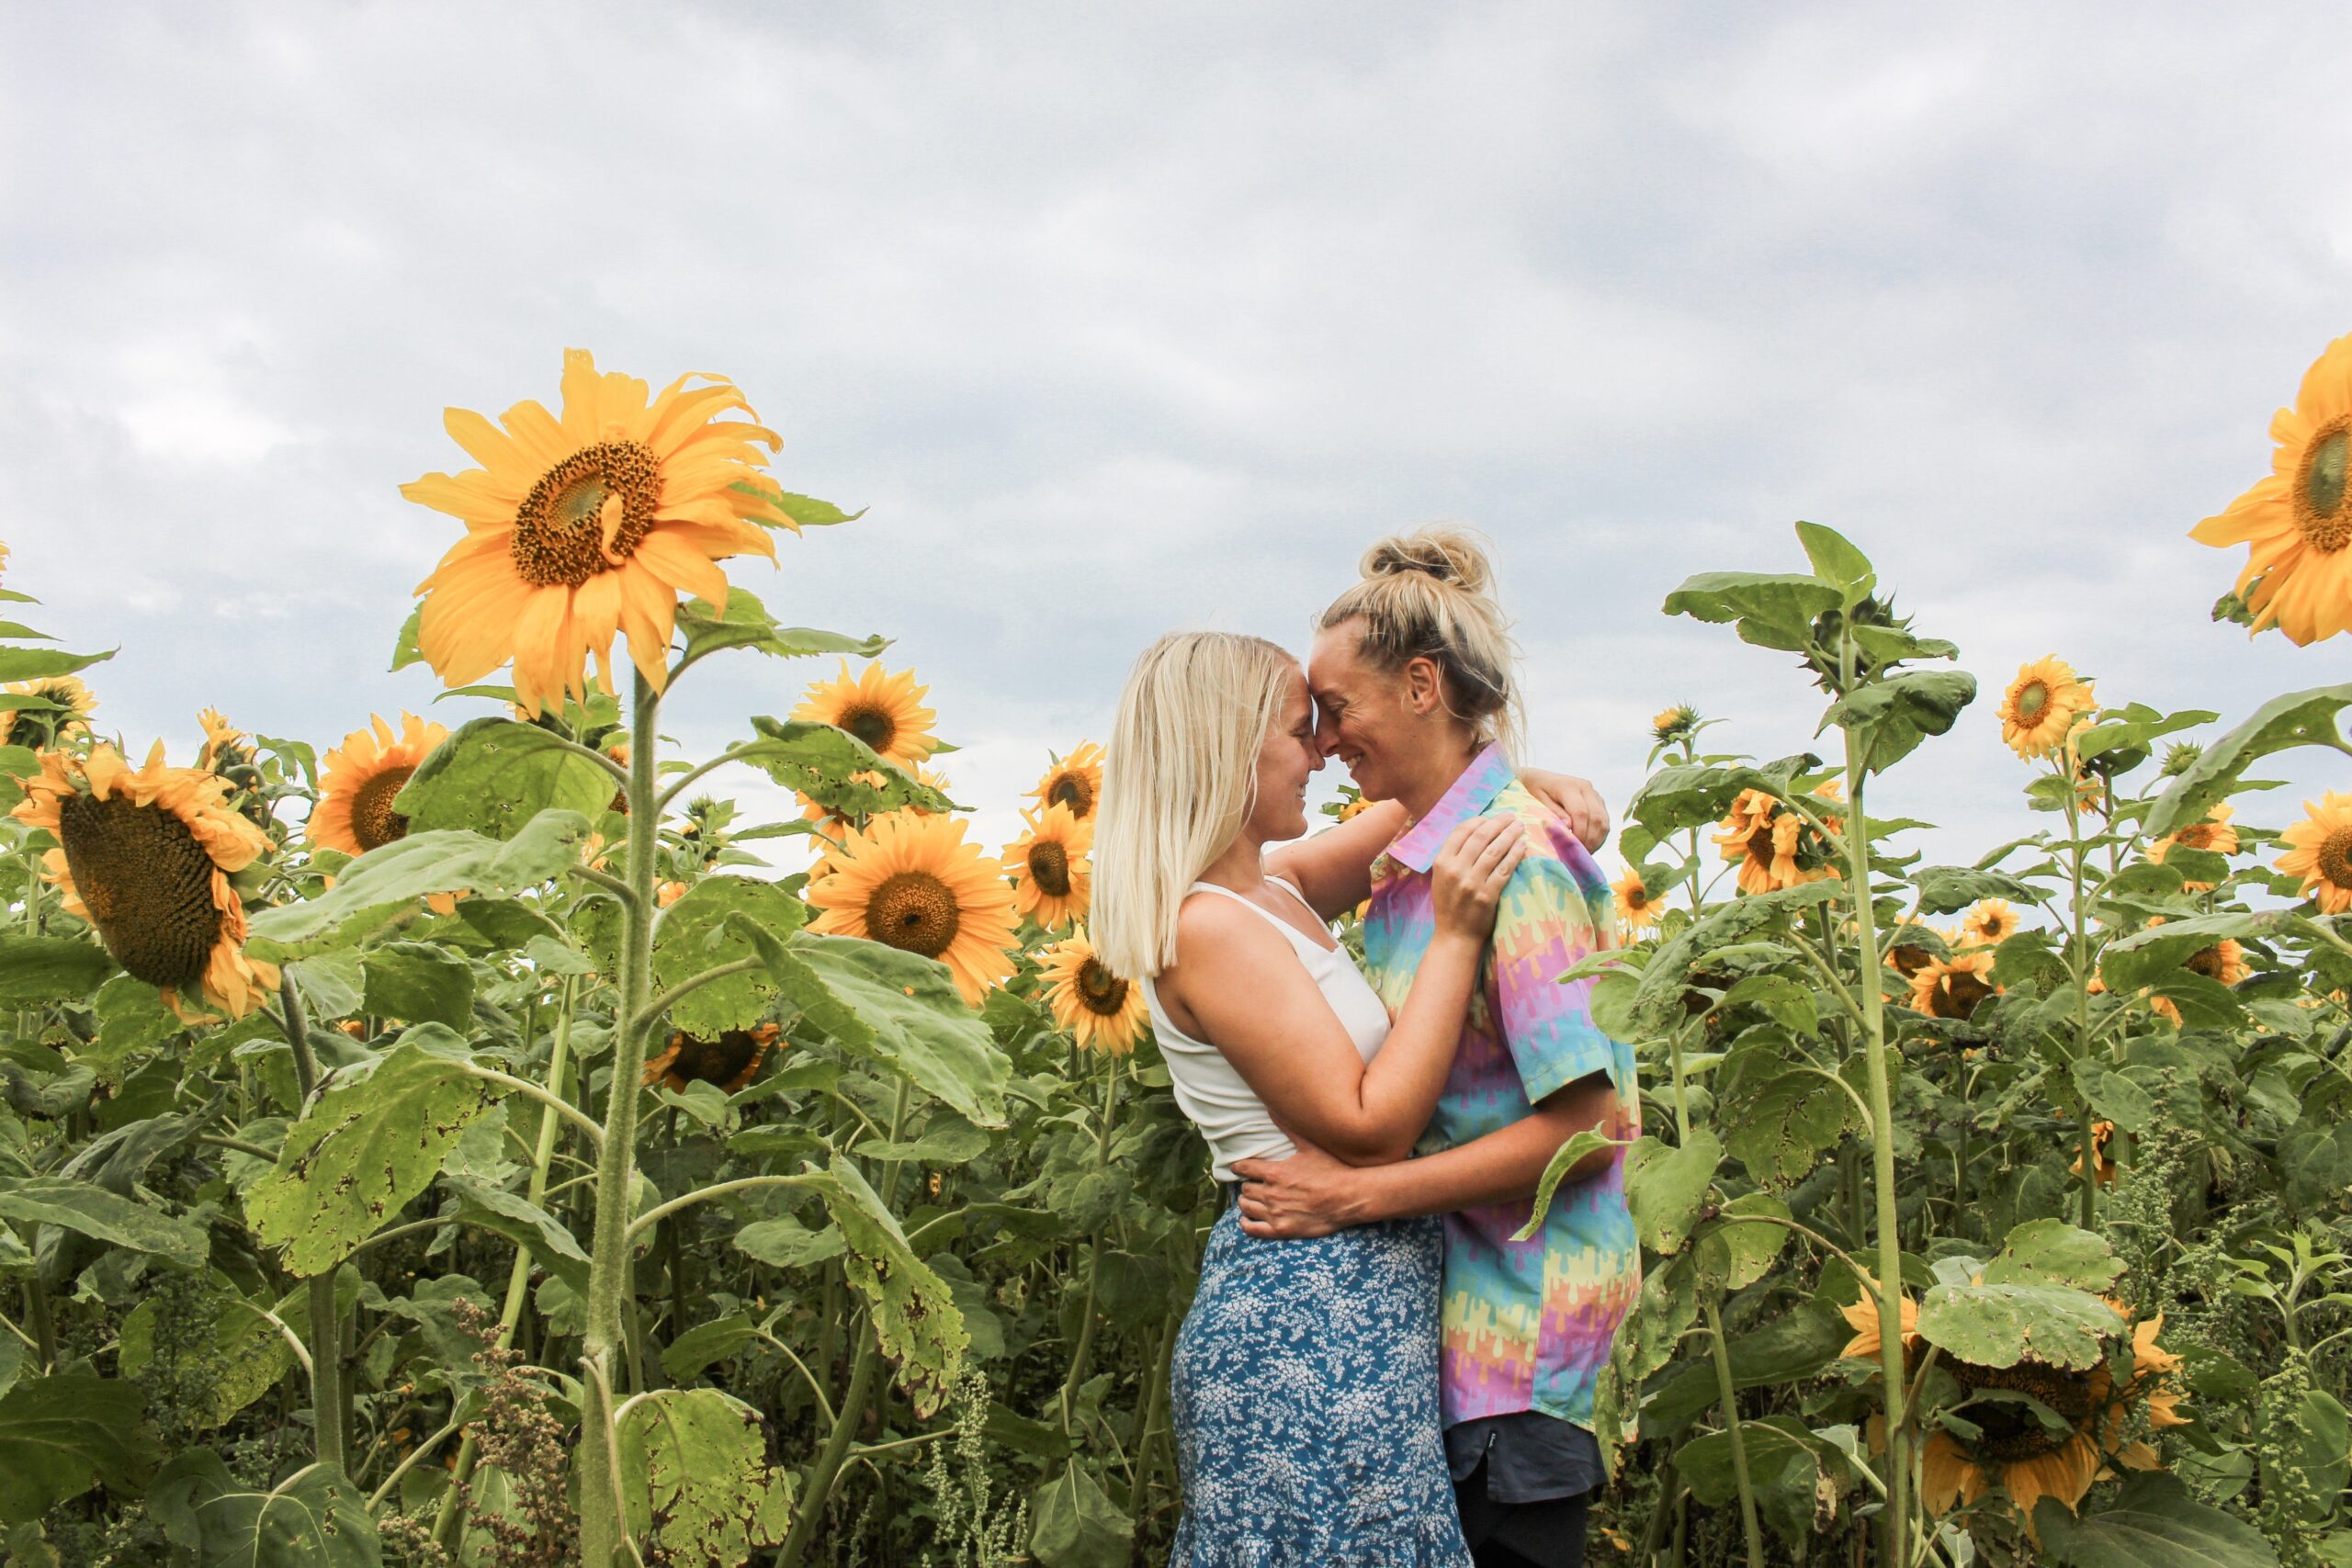 Lesbian couple hugging with sunflowers in the background